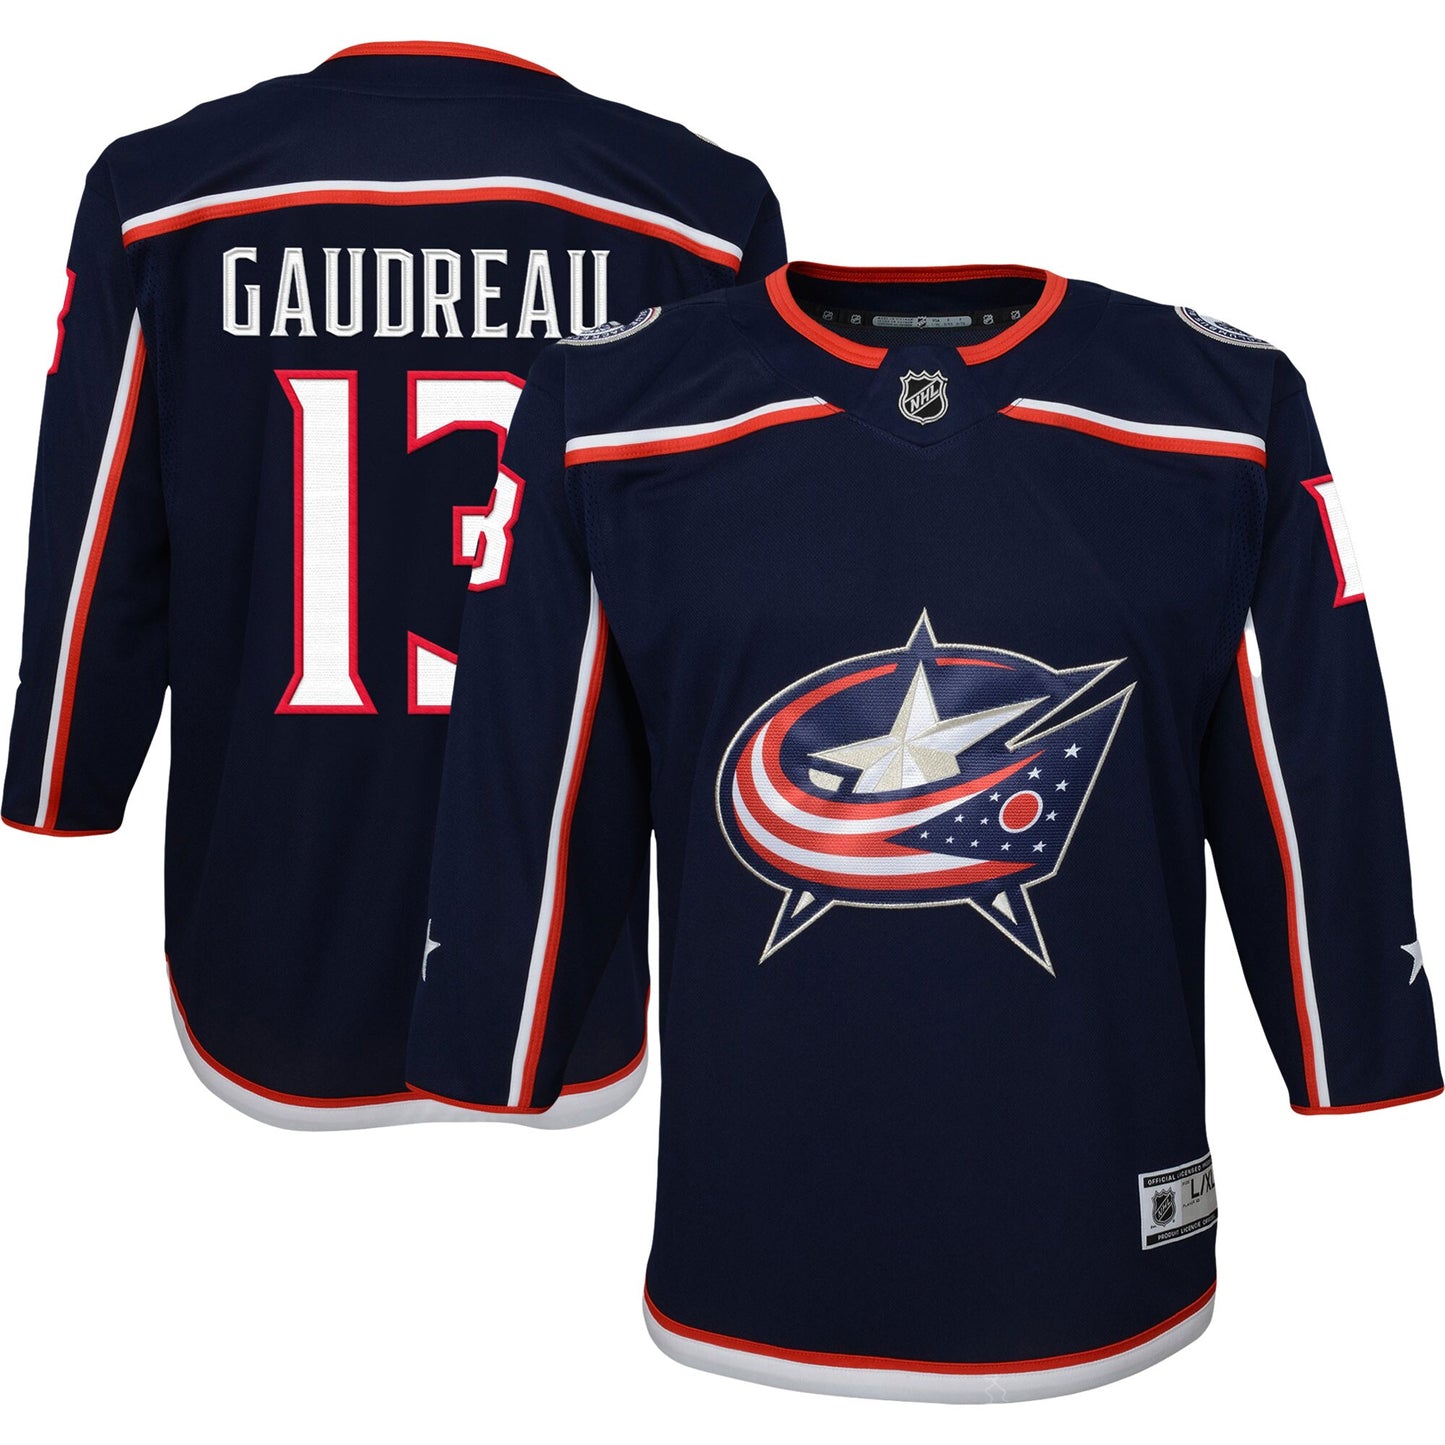 Johnny Gaudreau Columbus Blue Jackets Youth 2022/23 Premier Player Jersey - Navy